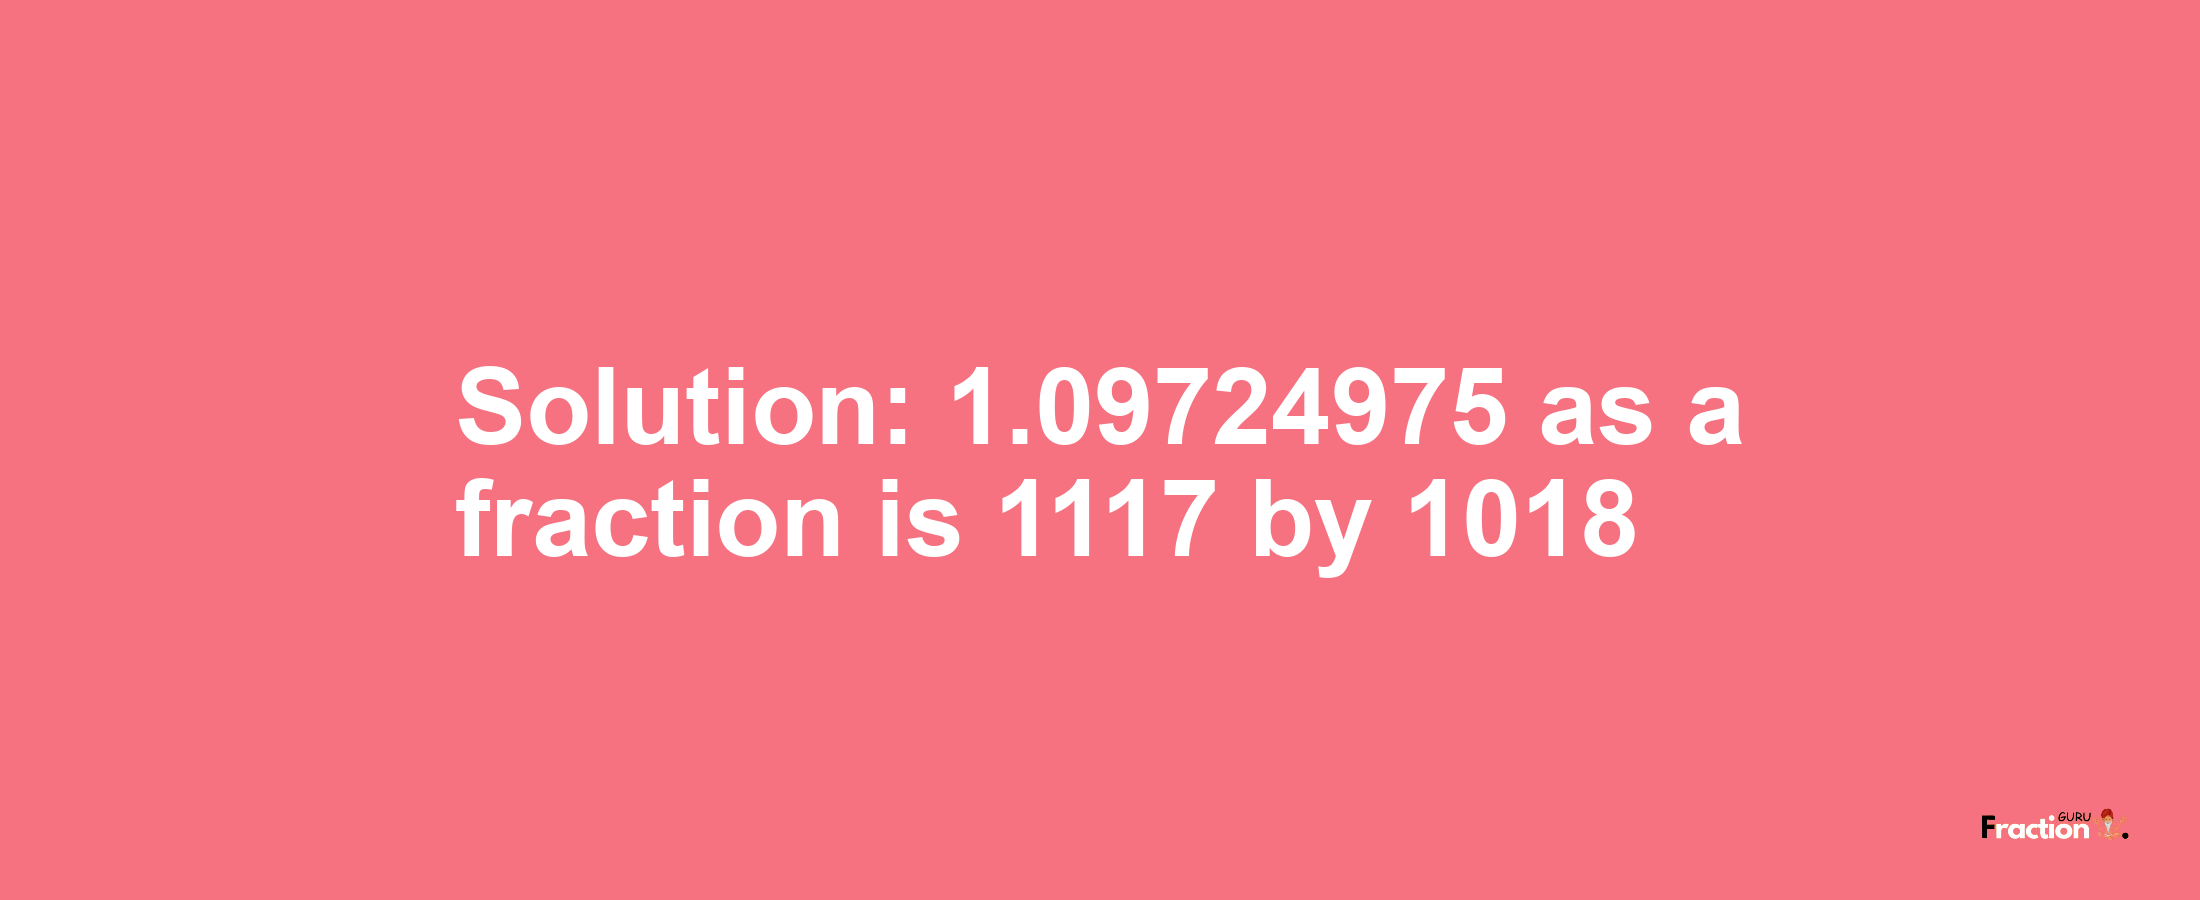 Solution:1.09724975 as a fraction is 1117/1018